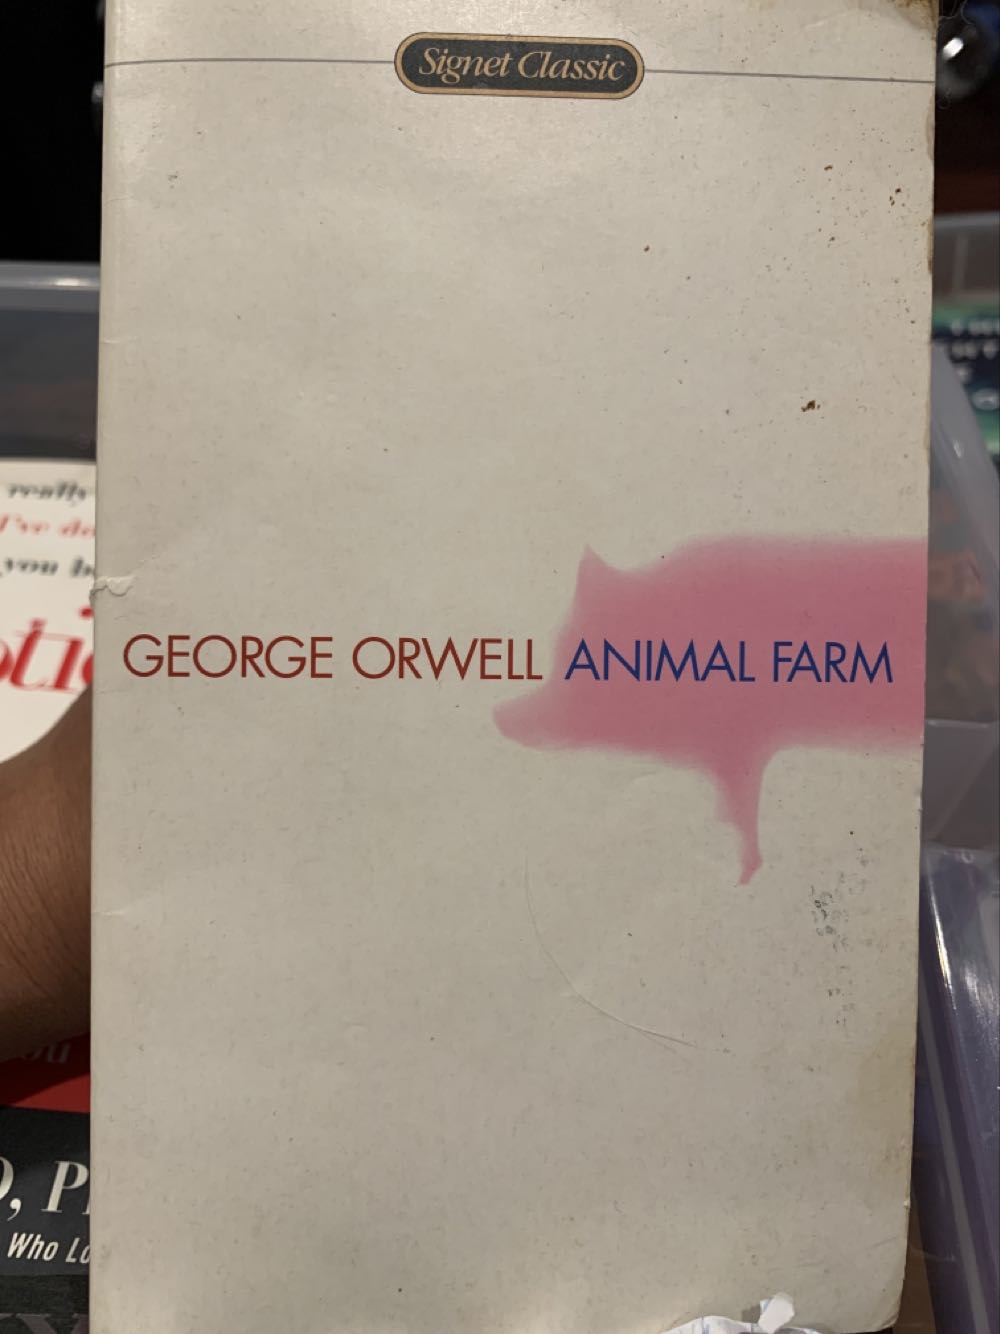 Animal Farm - George Orwell (Signet Classic - Paperback) book collectible [Barcode 9780451526342] - Main Image 4